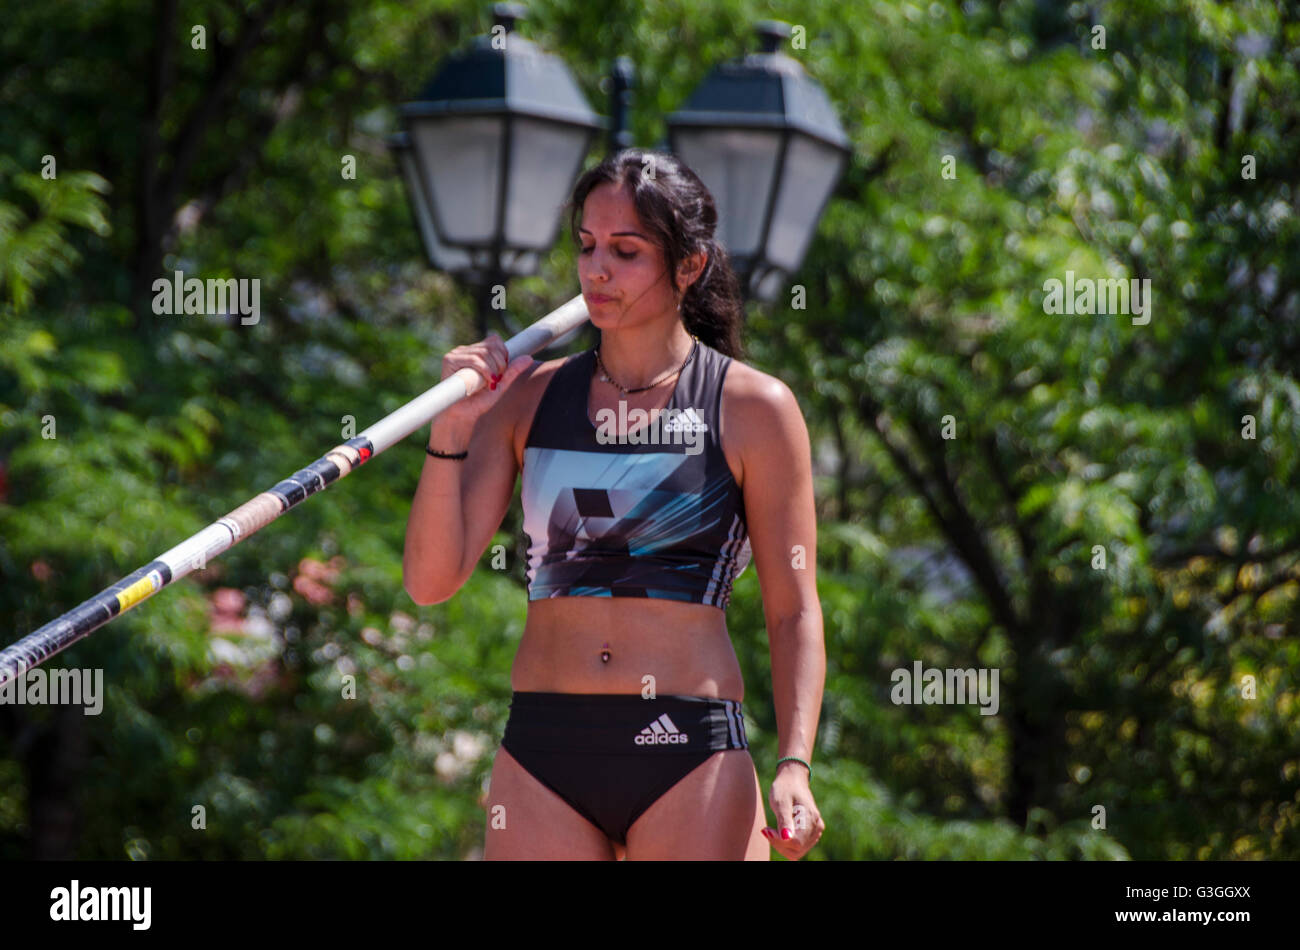 Pole Vaulter Ledaki Stiliani-Iro getting ready for her jump.SEGAS (Hellenic  Amateur Athletic Association) organised the 4th Athens Pole Vault Event in  Syntagma Square giving the chance to people to see the sport